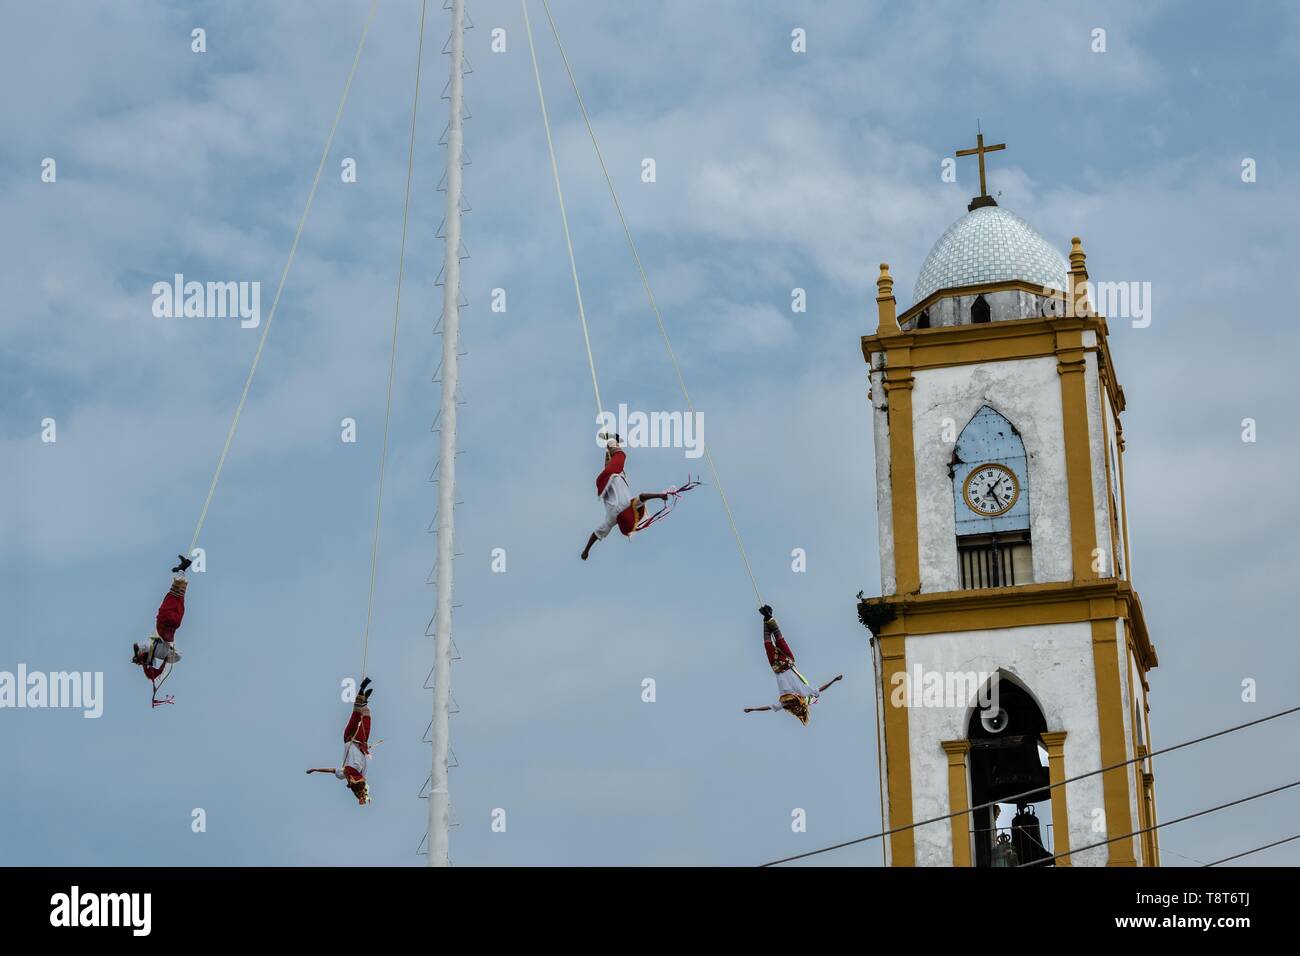 Voladores performs in front of the Church of the Assumption in Papantla, Veracruz, Mexico. The Danza de los Voladores is a indigenous Totonac ceremony involving five participants who climb a thirty-meter pole. Four of these tie ropes around their waists and wind the other end around the top of the pole in order to descend to the ground. The fifth participant stays at the top of the pole, playing a flute and a small drum. The ceremony has been inscribed as a Masterpiece of the Oral and Intangible Heritage of Humanity by UNESCO. Stock Photo